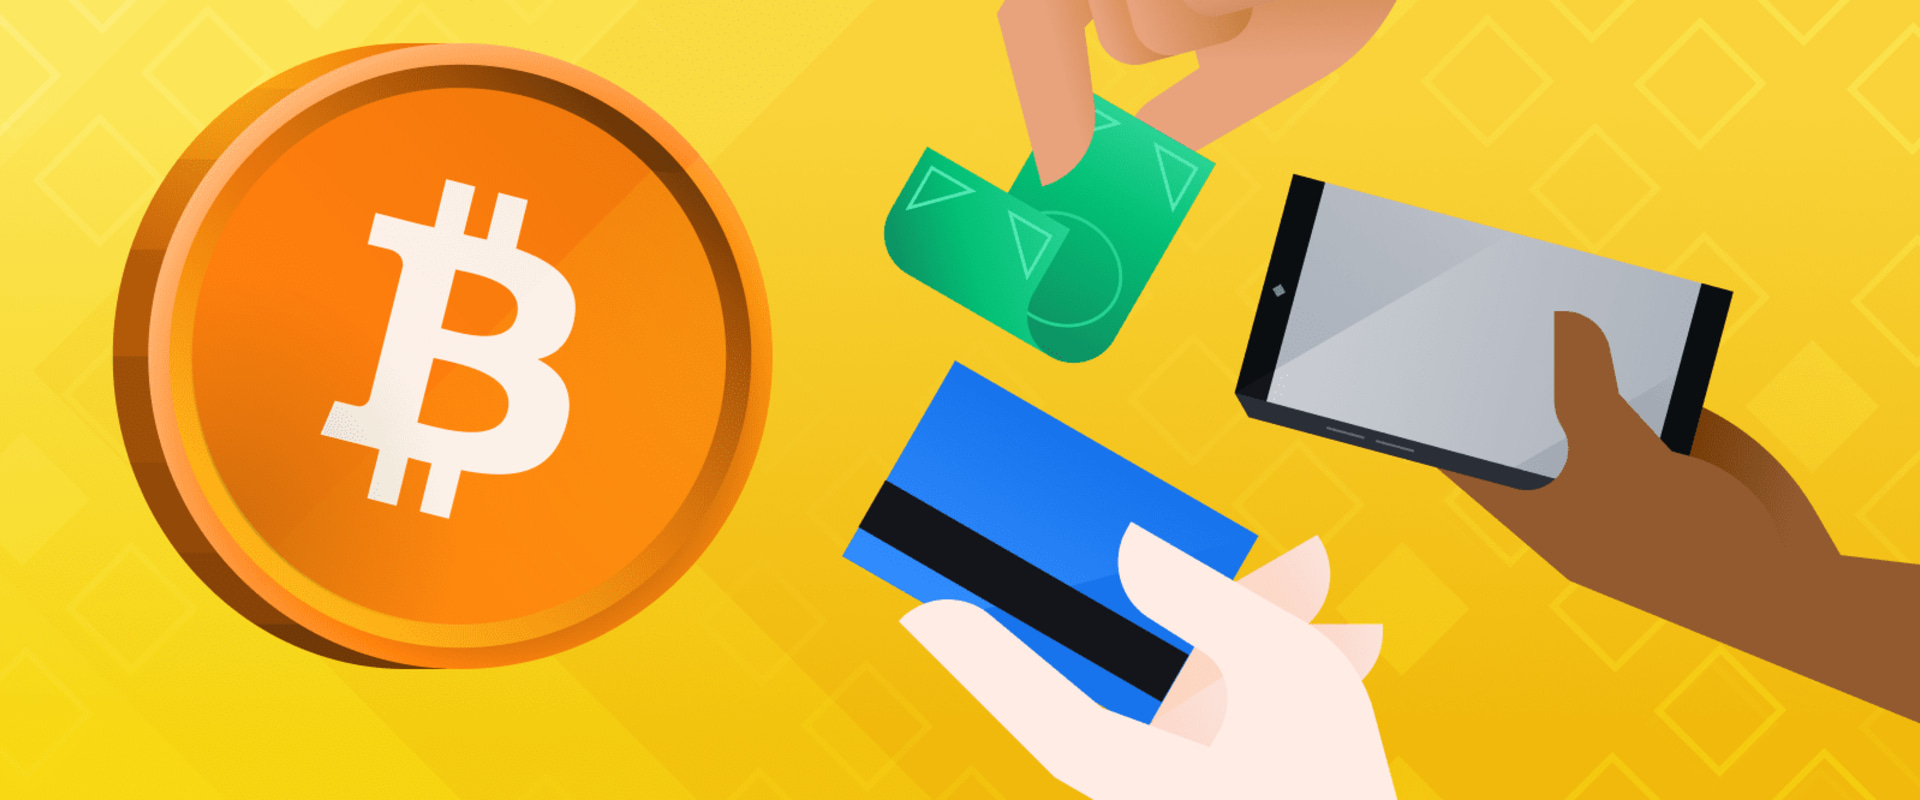 Depositing Funds and Buying Cryptocurrency